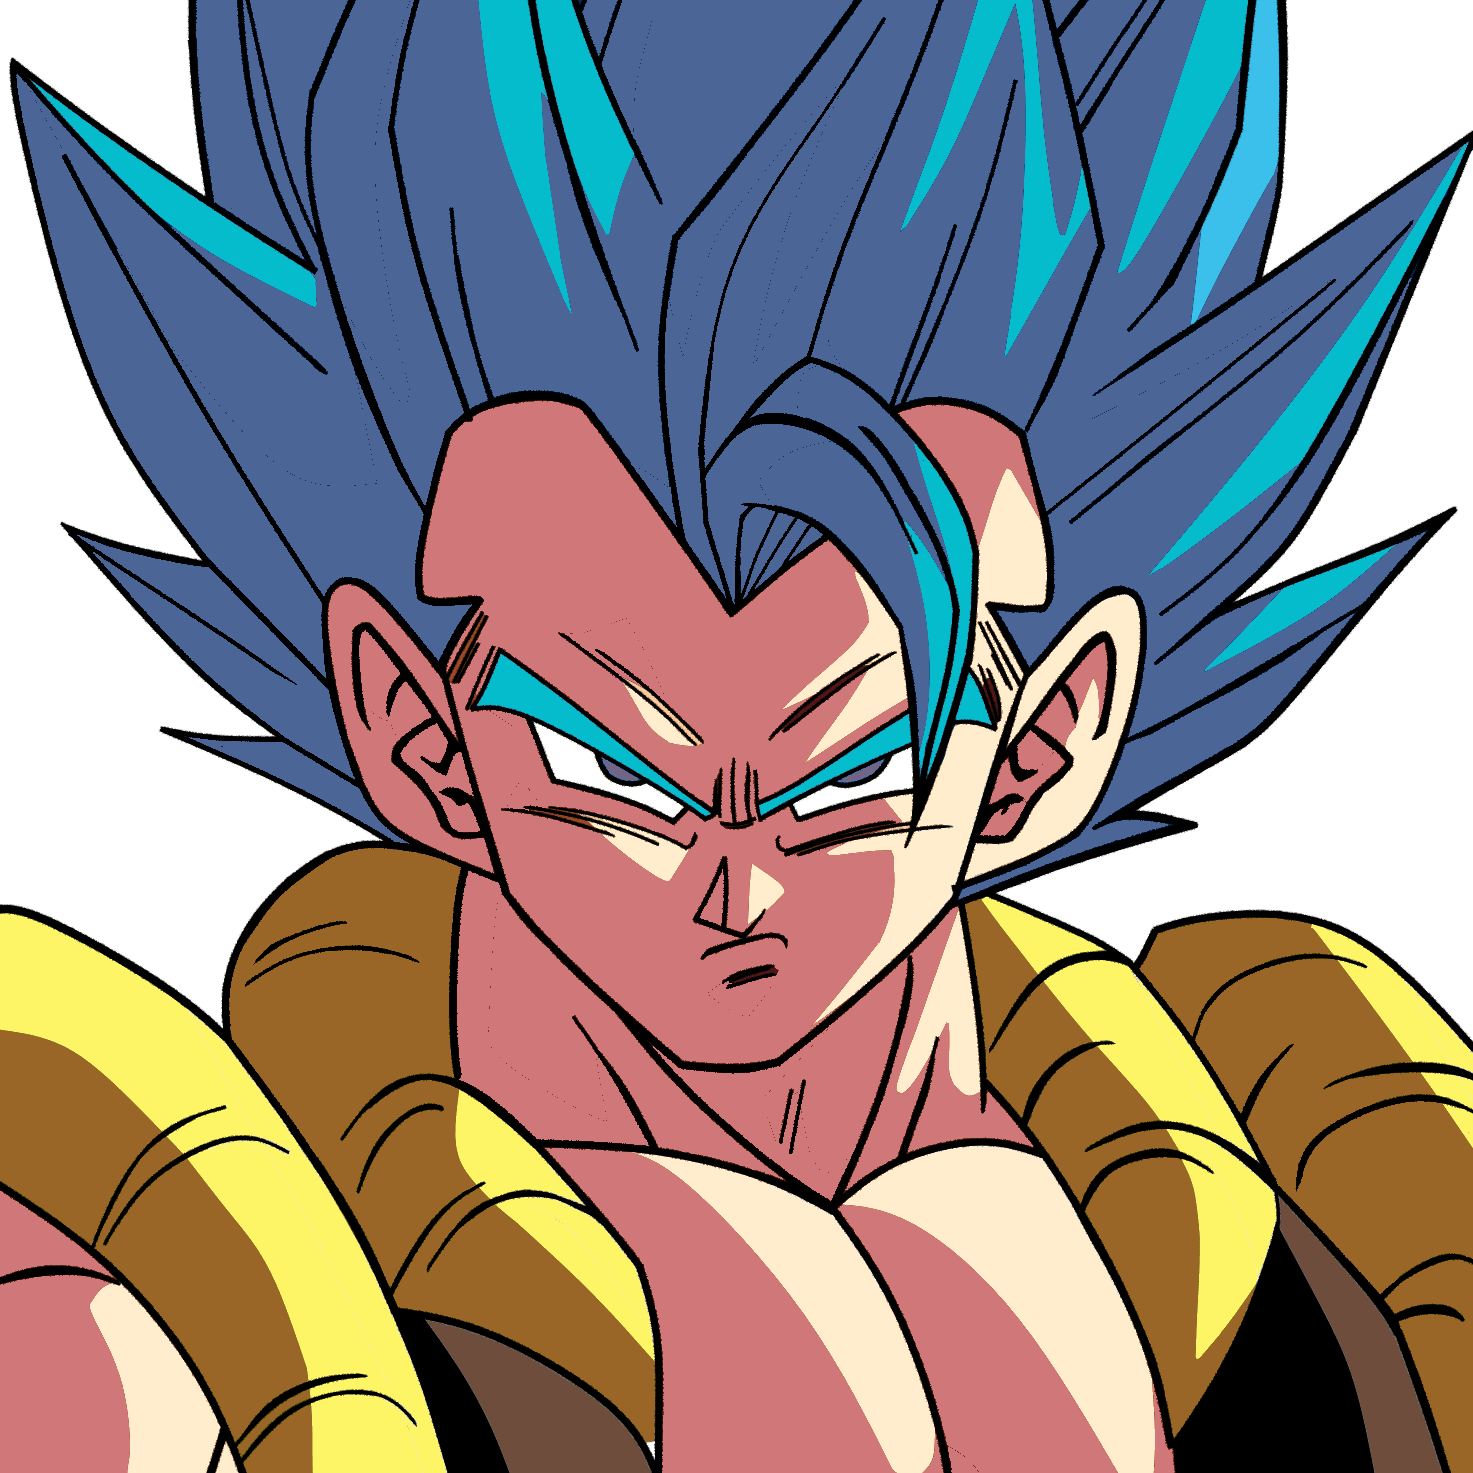 Super Gogeta Animated Picture Codes and Downloads #39968672,328113235